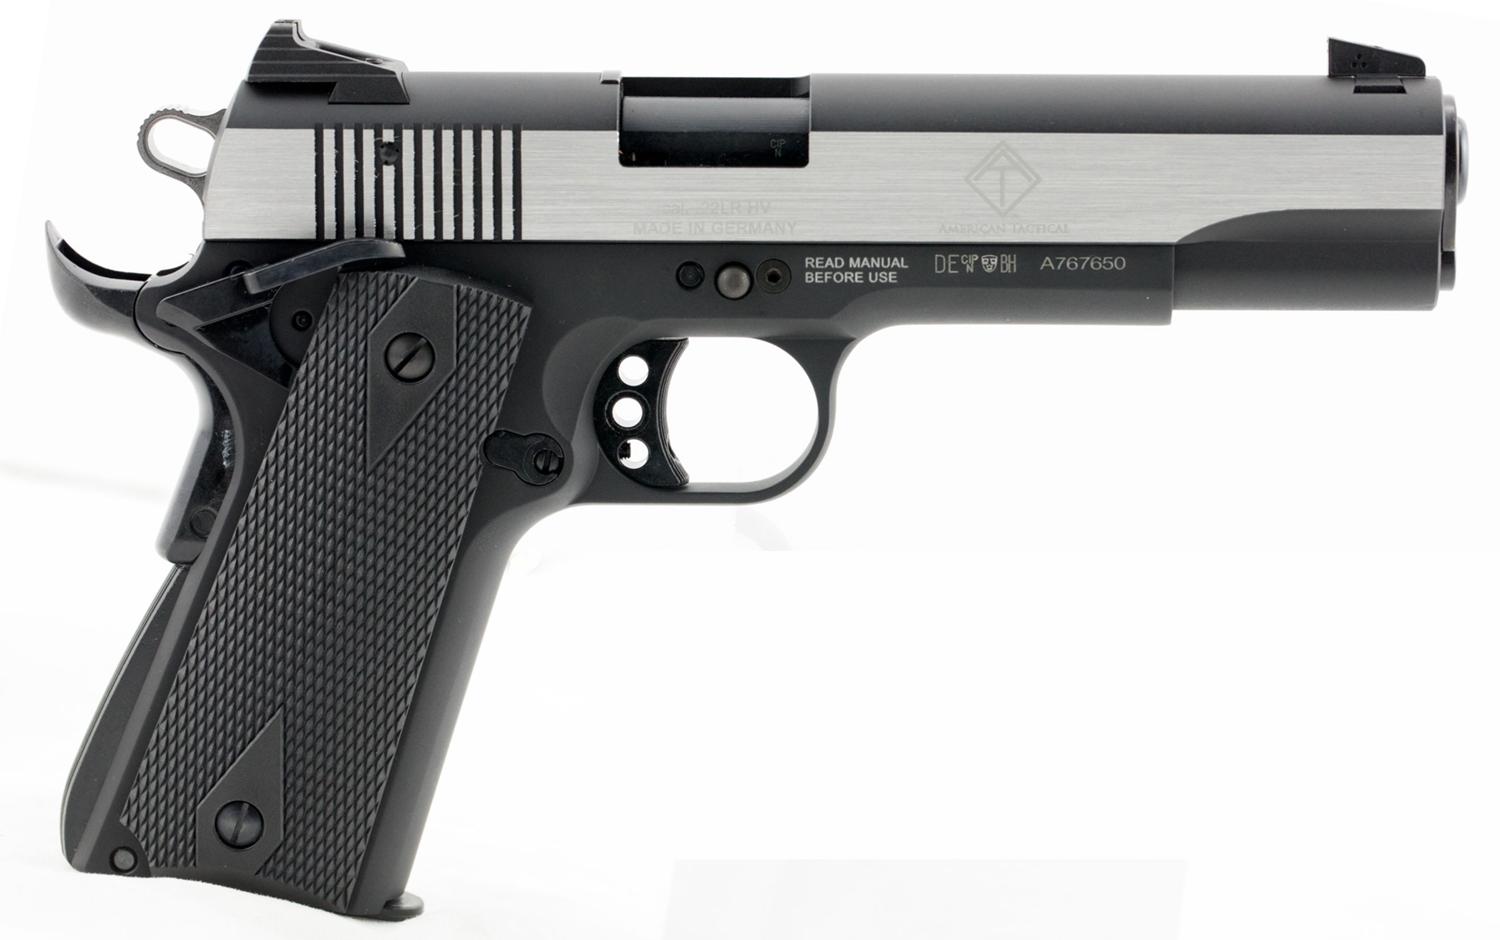 American Tactical GSG 1911 Pistol 2210M1911S, 22 Long Rifle, 5", Black Polymer Grips, Black Hard Coat Anodized Finish, 10 Rd